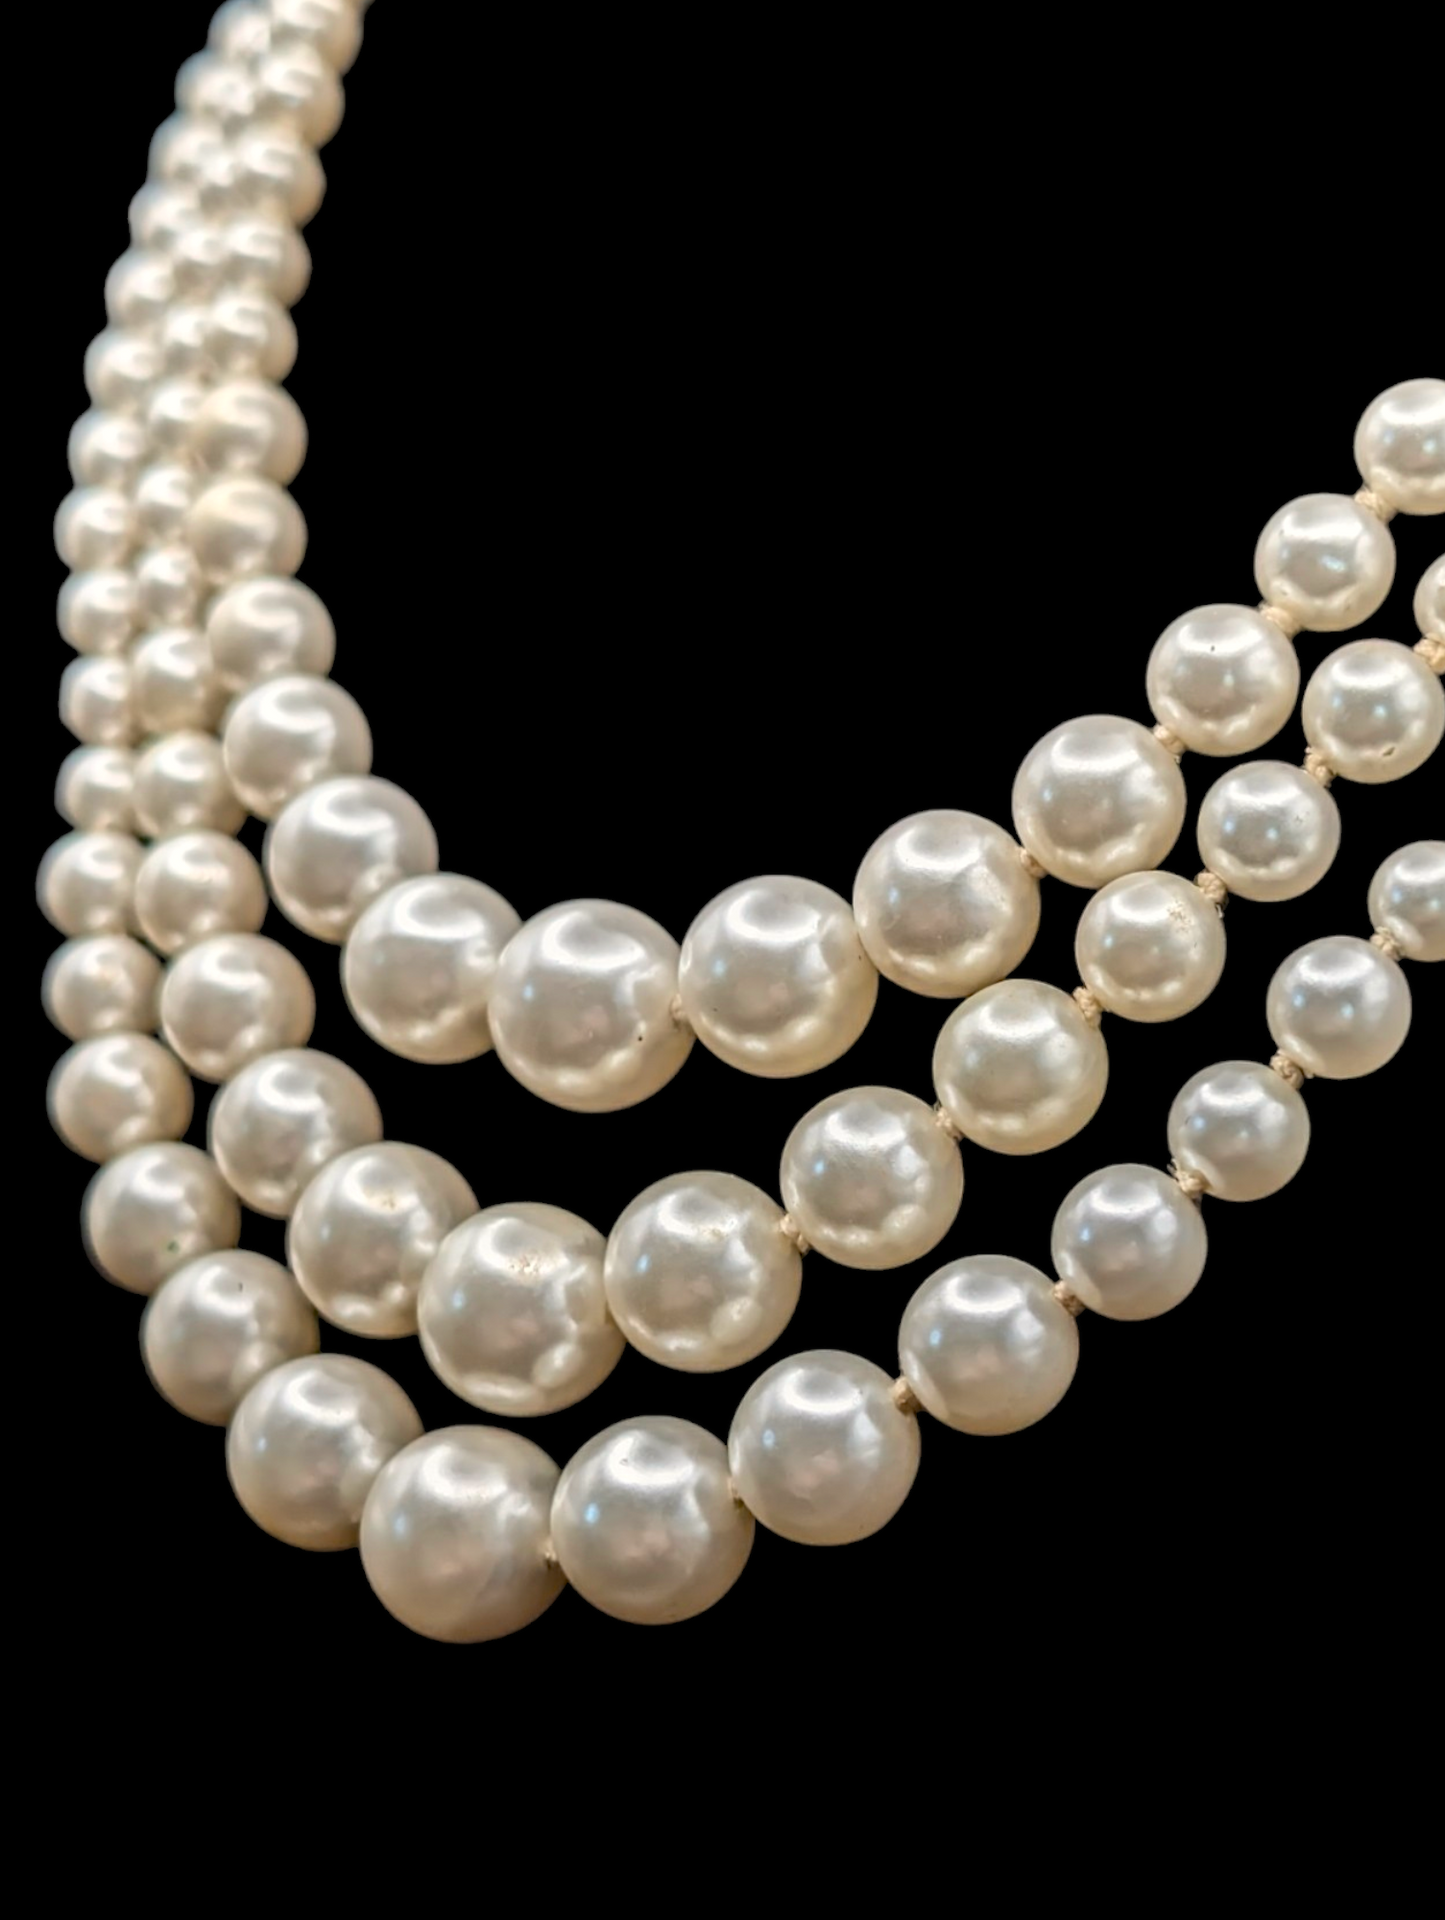 1940s-1960s 3 Strand Faux Pearl Necklace